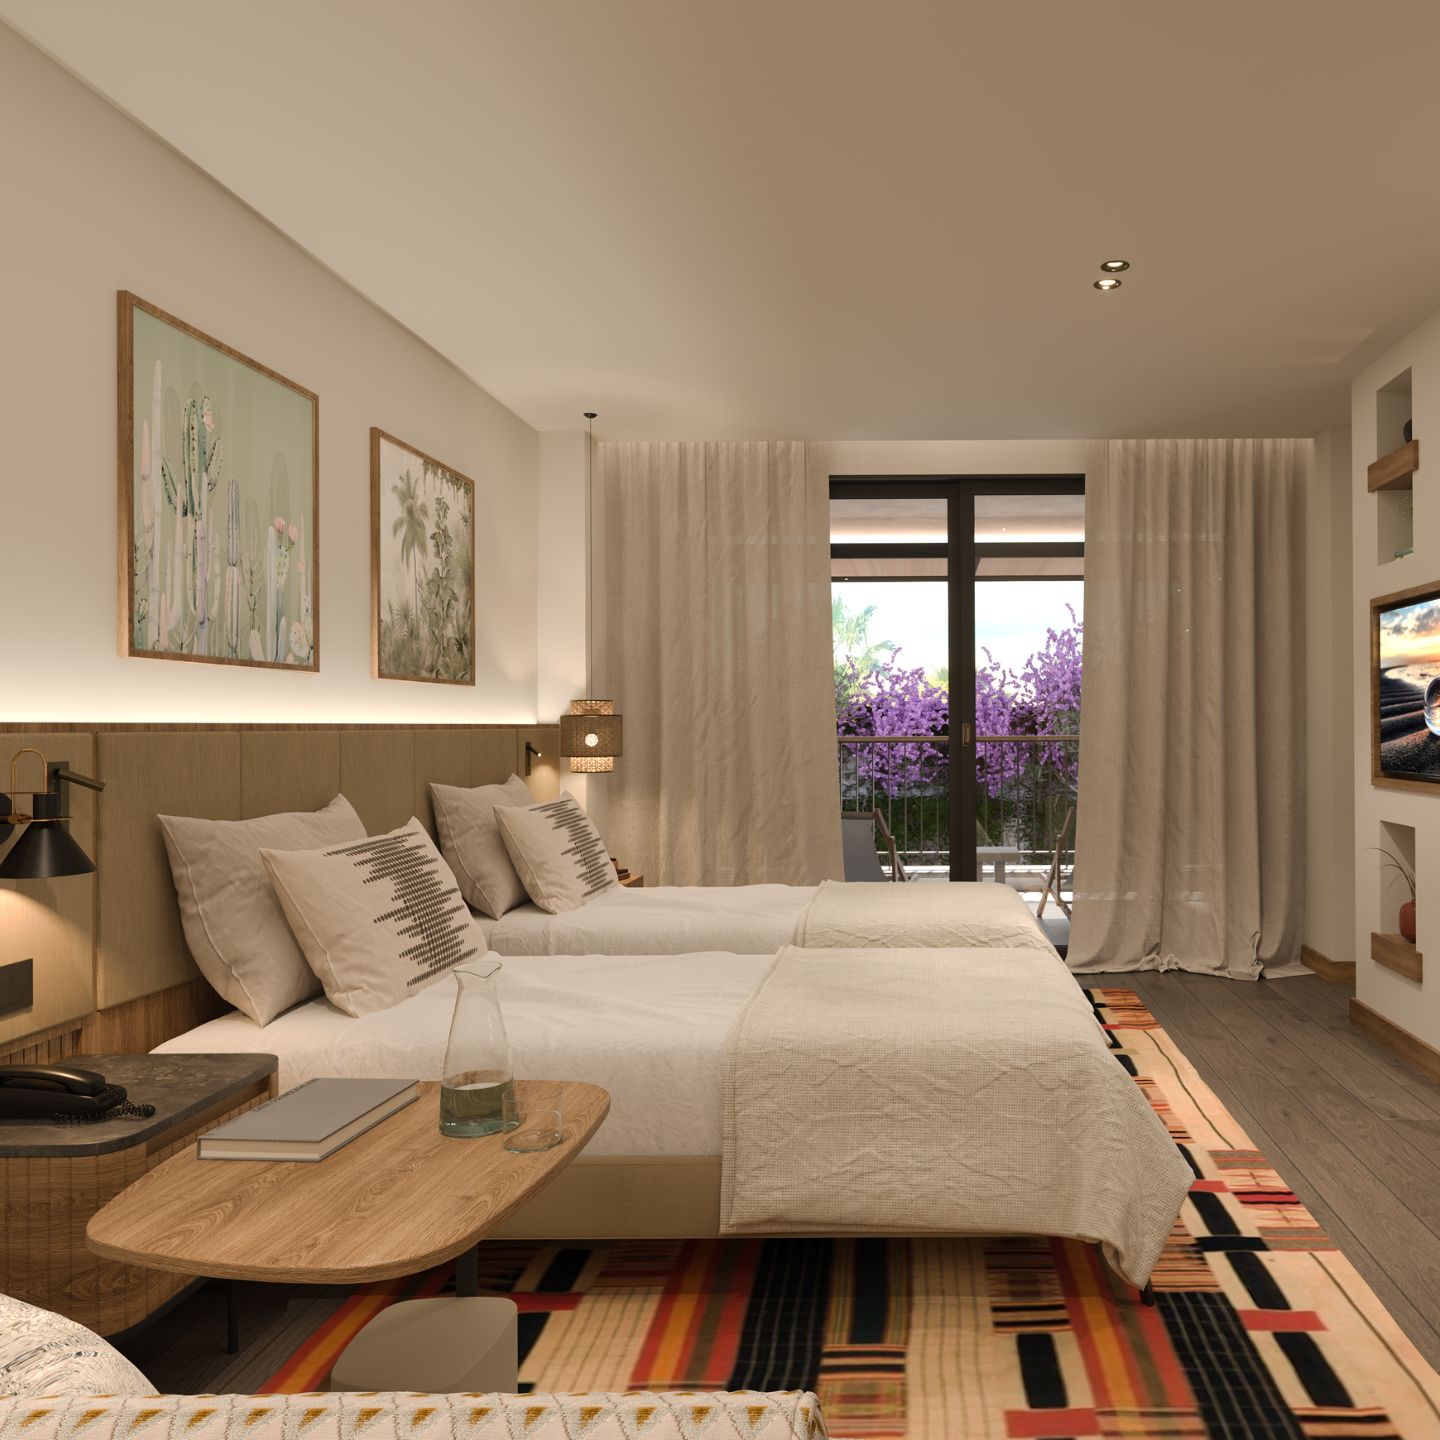 Two beige twin beds with wooden headboard on a colorful striped rug with wooden side table with artwork on walls, beige curtains opening to sliding doors in the background